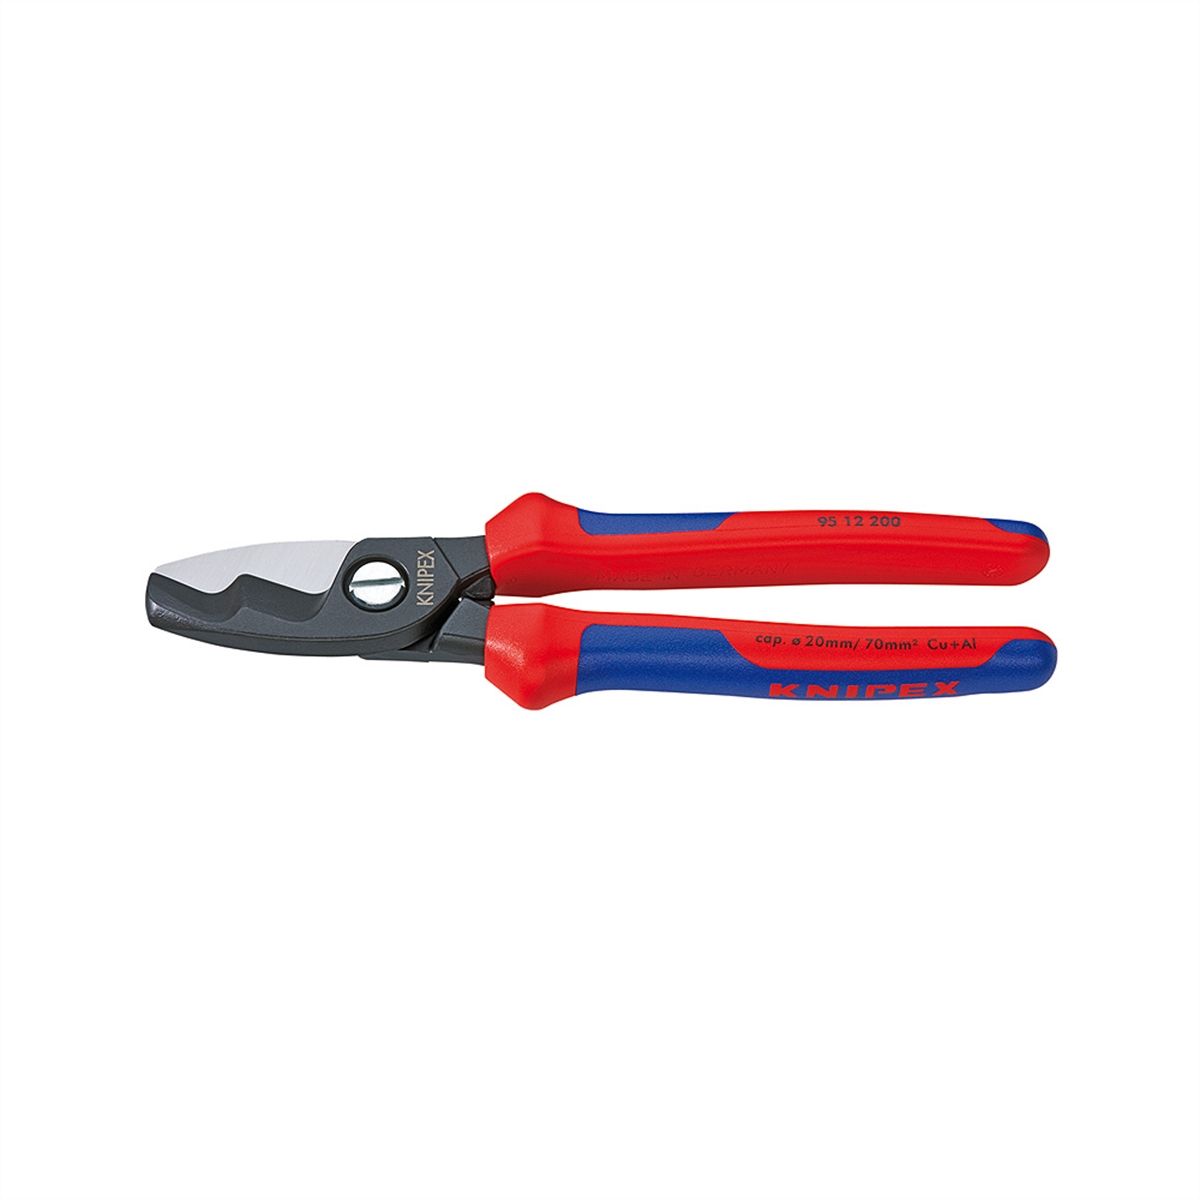 9512-8 Cable Shears w/ 2 Blades 95 12 200 - 200mm